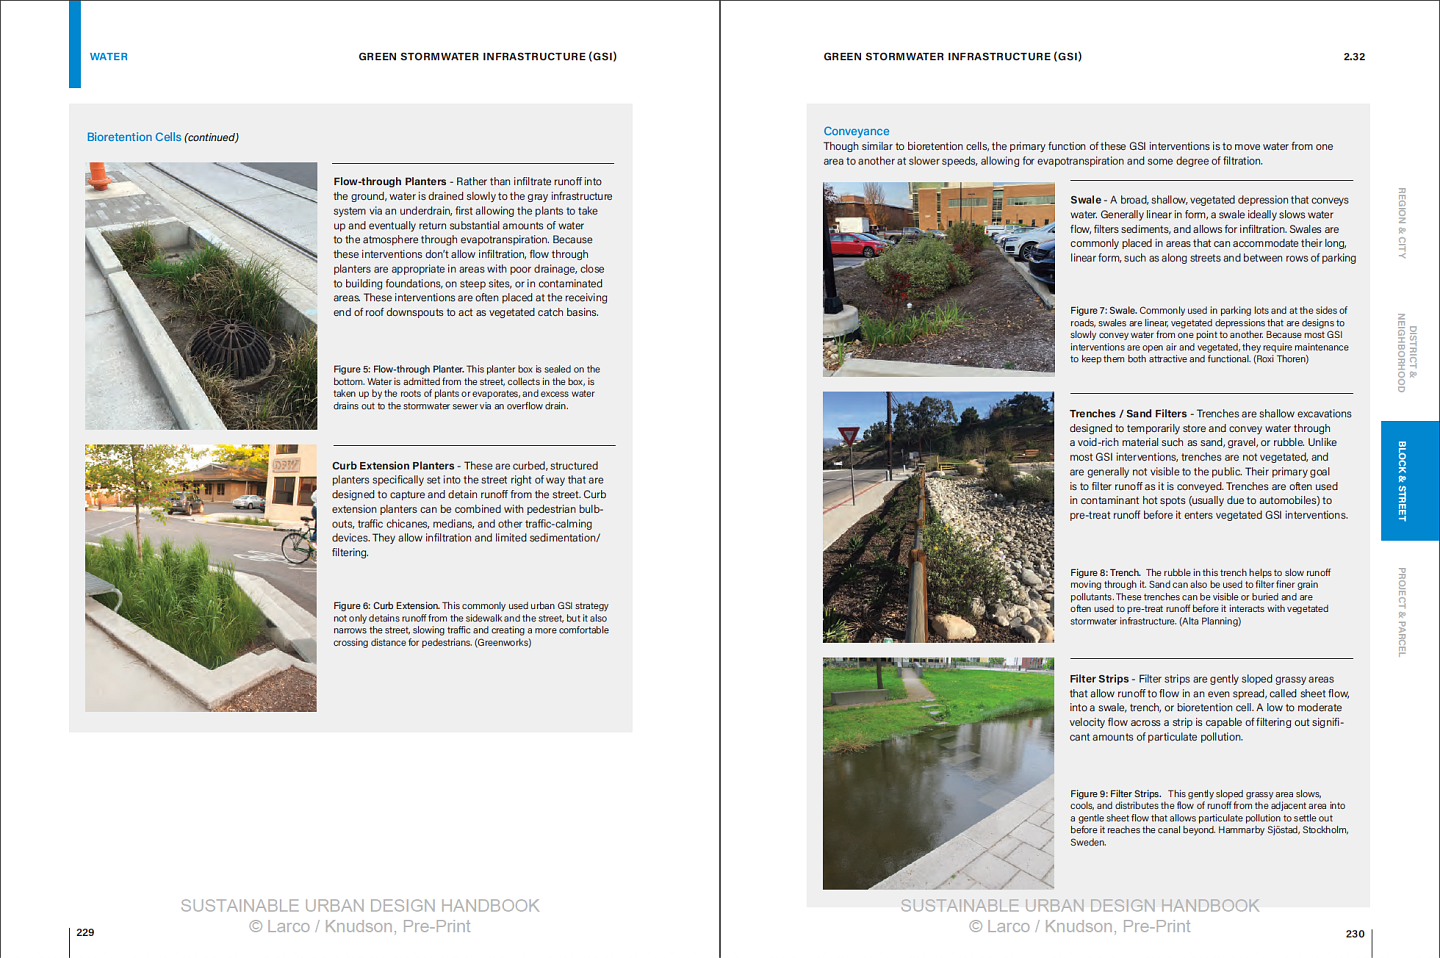 Sample Chapter from the Sustainable Urban Design Handbook